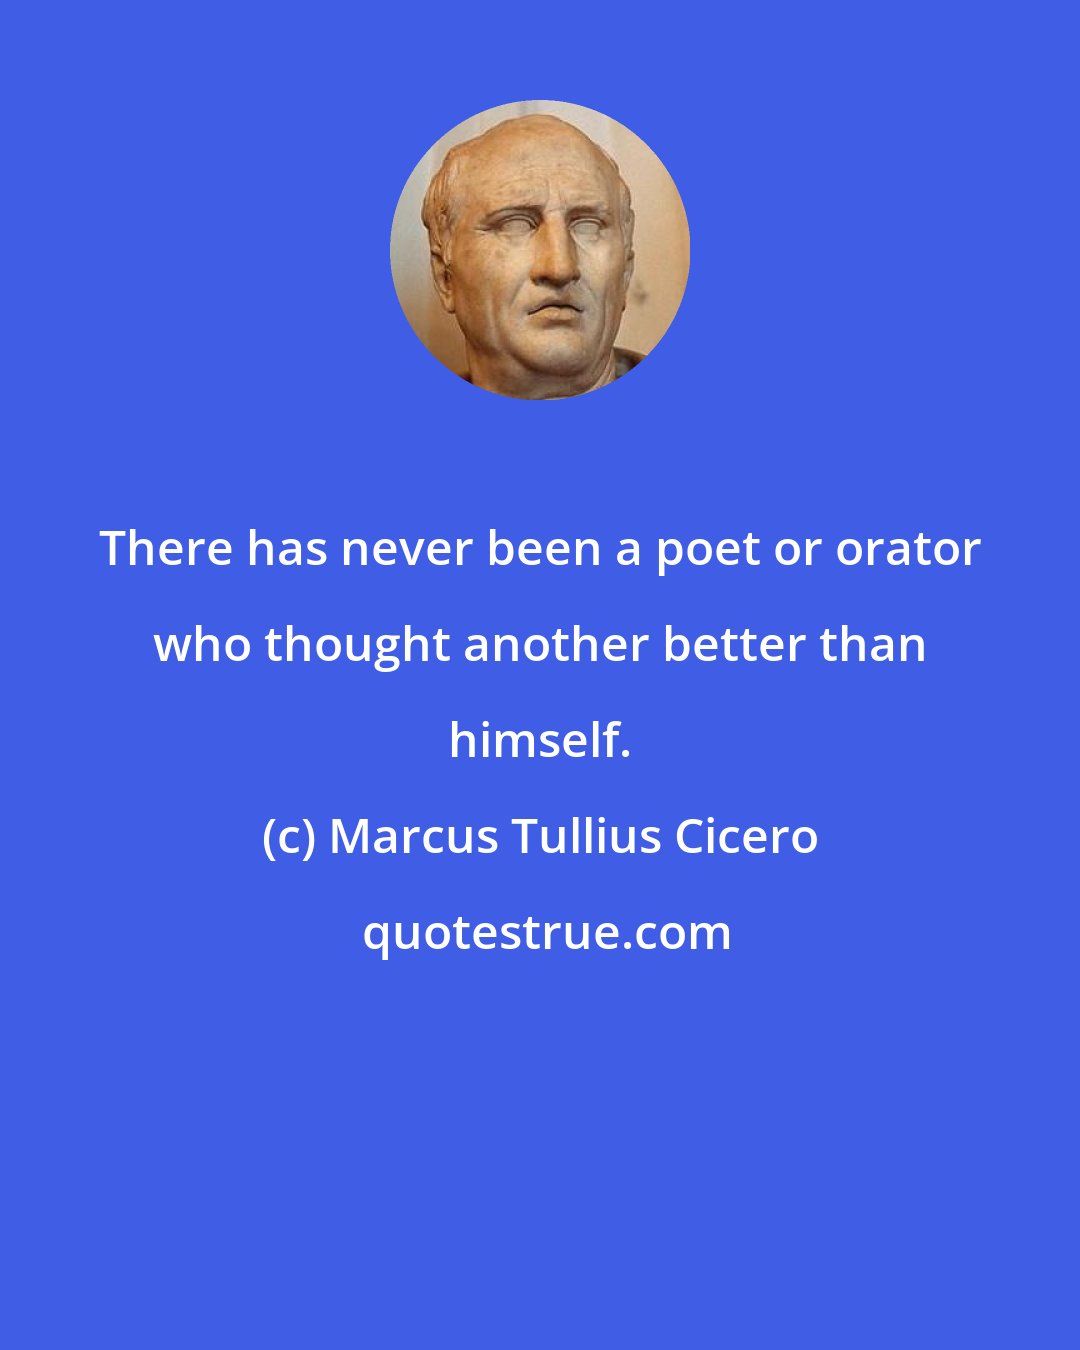 Marcus Tullius Cicero: There has never been a poet or orator who thought another better than himself.